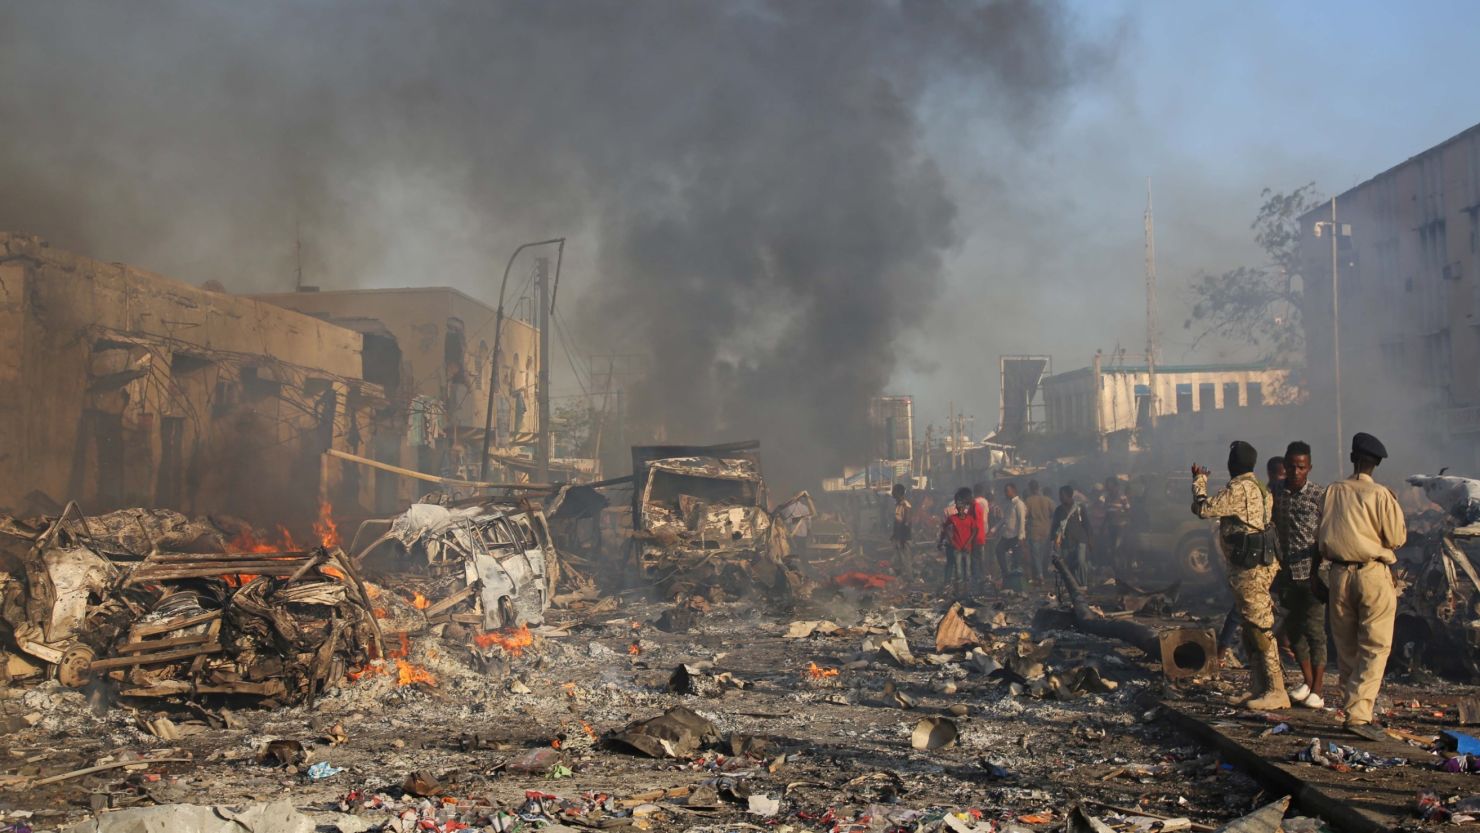 At least 20 people died and others were wounded in a bombing Saturday in Mogadishu, 